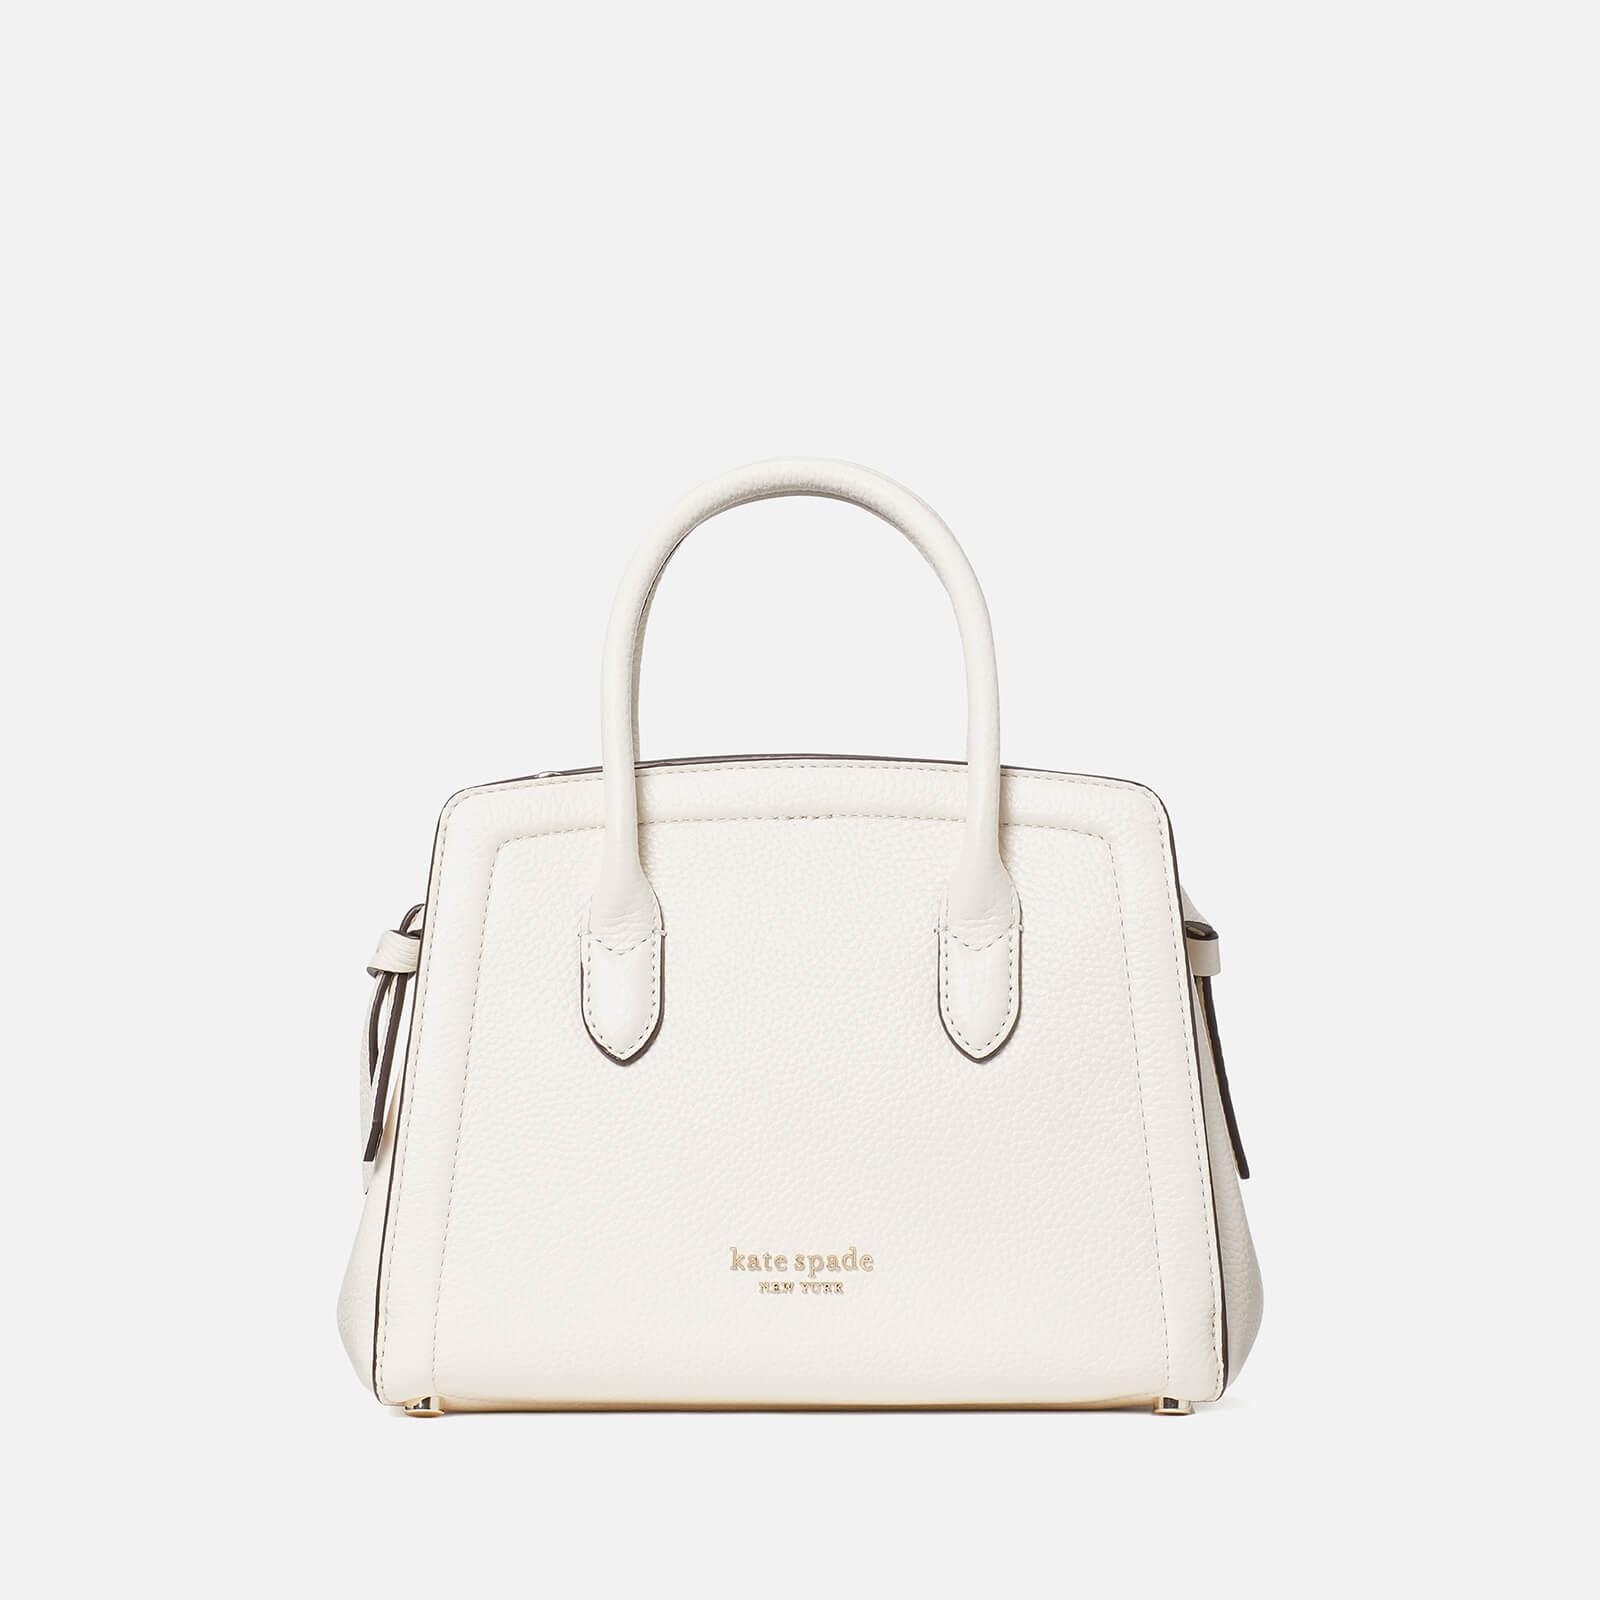 Kate Spade Knott Large Satchel Cream White Pebbled Leather with